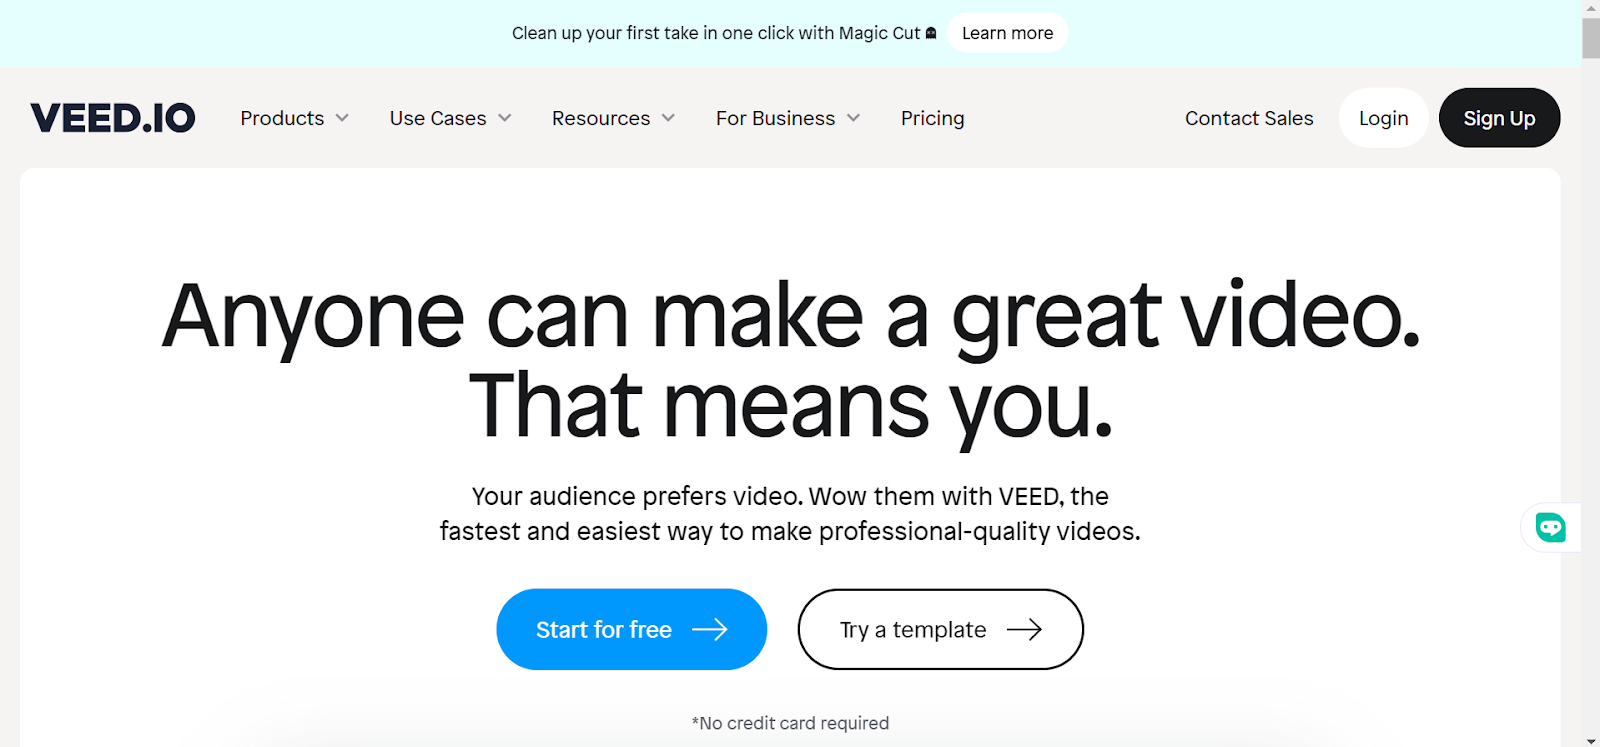 Veed.io: Automated text and sound.